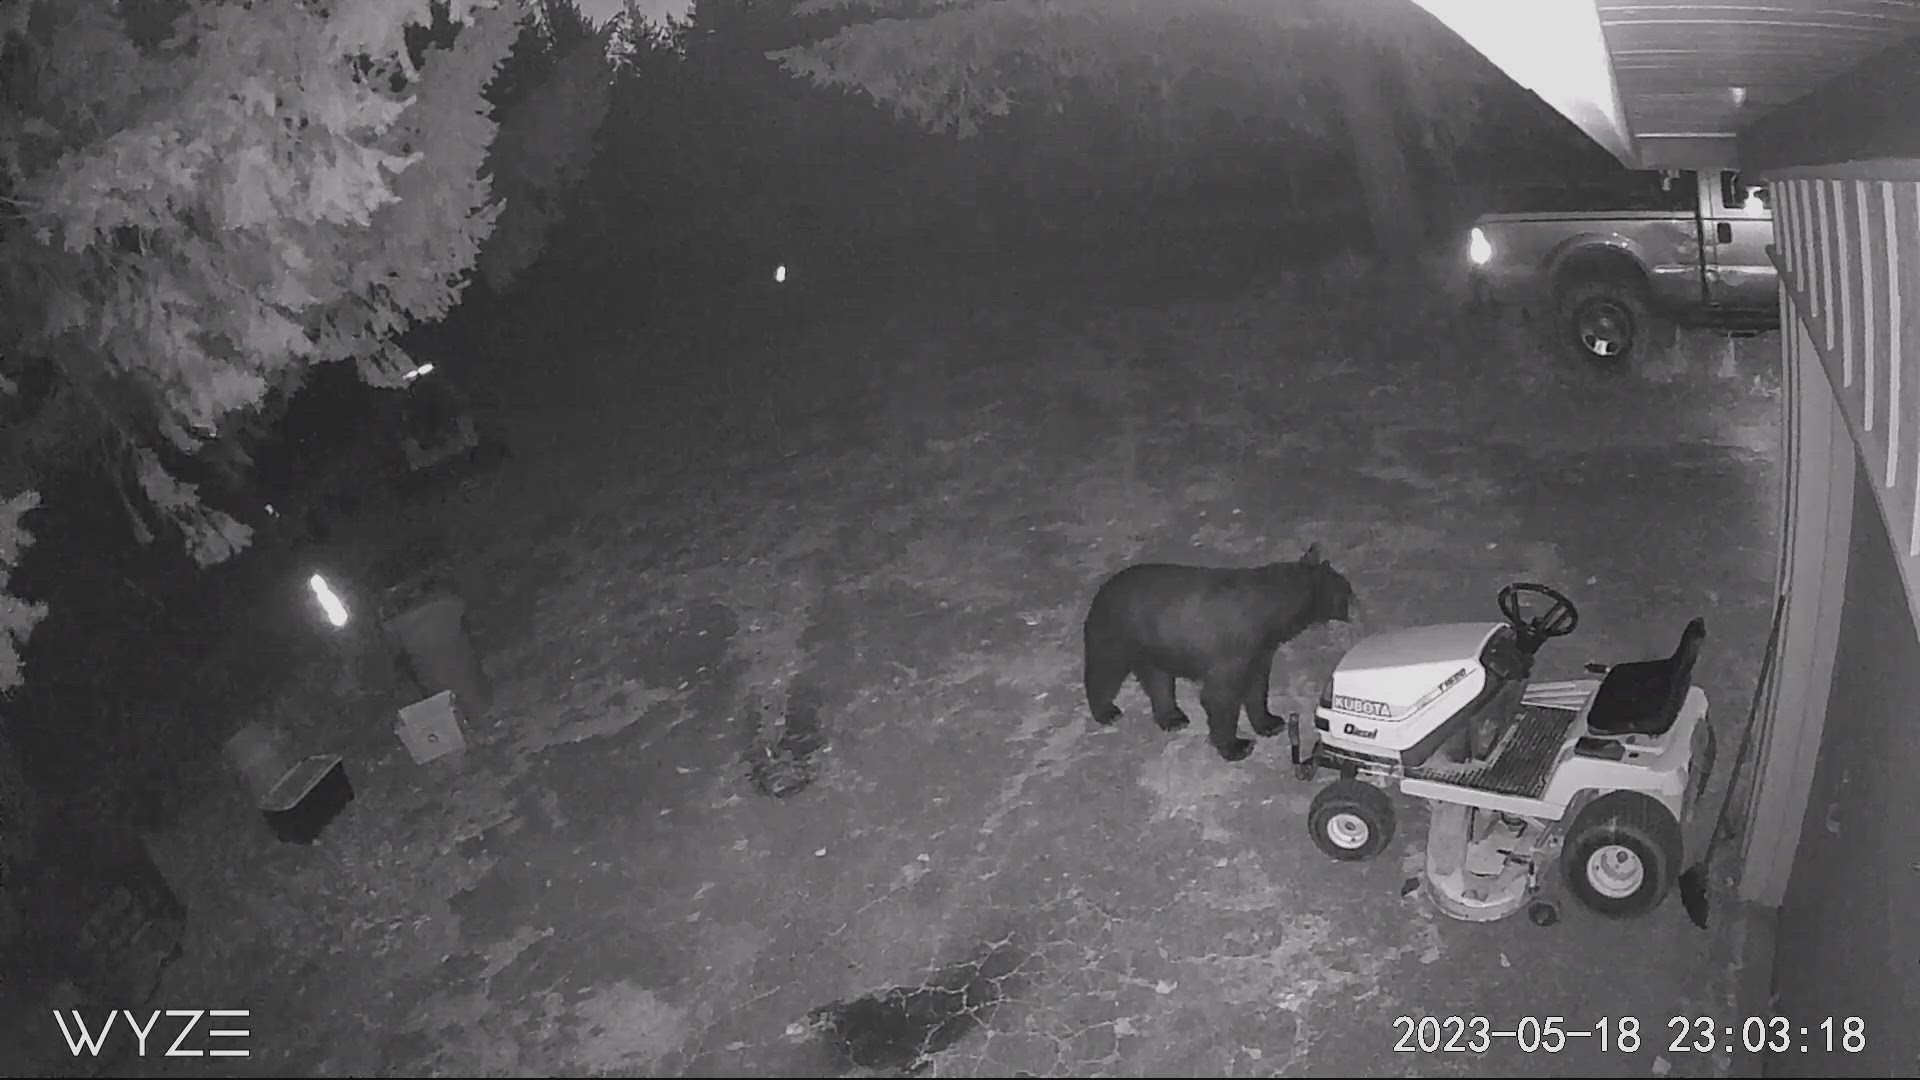 Wildlife officials are asking neighbors to remove bird feeders, beehives and garbage cans to help prevent bears from coming onto their property.